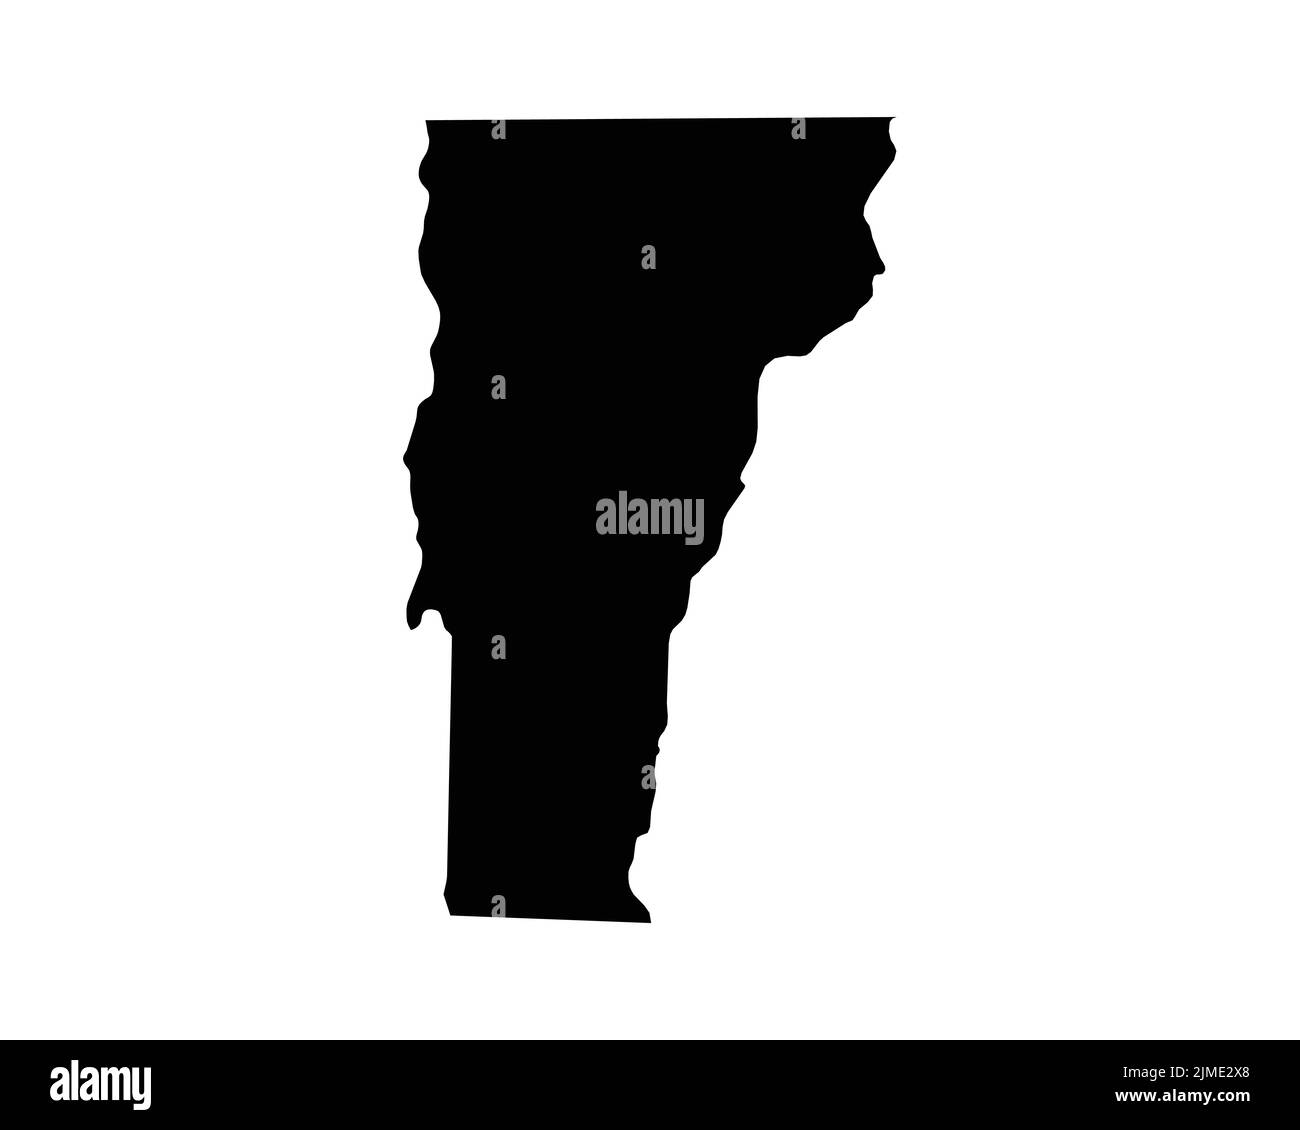 Vermont US Map. VT USA State Map. Black and White Vermonter State Border Boundary Line Outline Geography Territory Shape Vector Illustration EPS Clipa Stock Vector